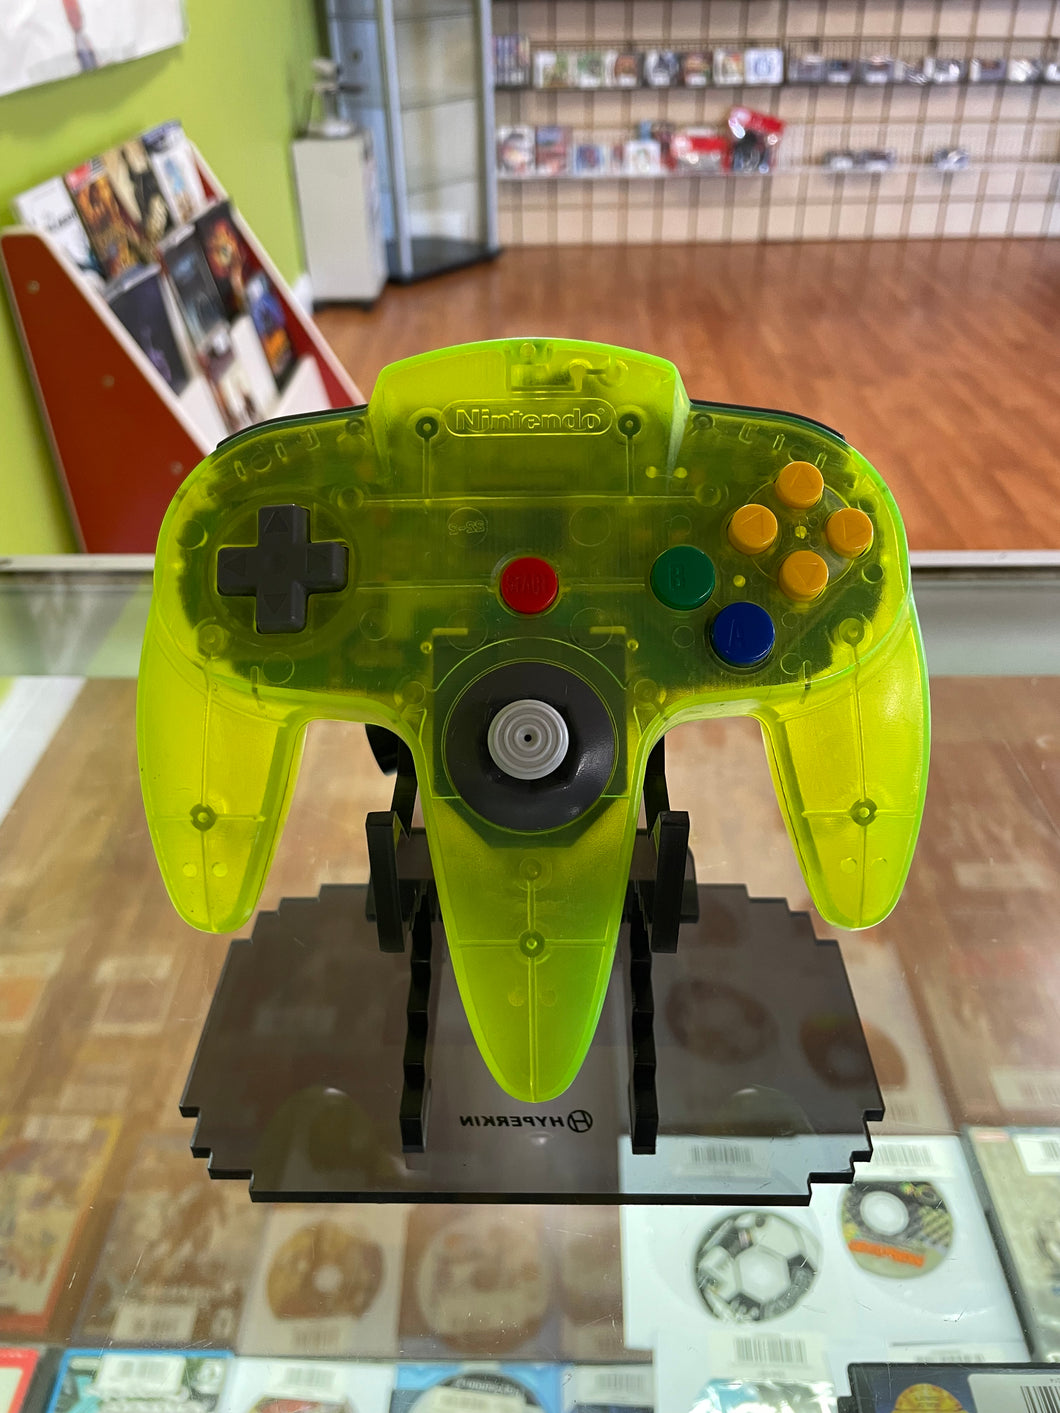 N64 Extreme Green Neon Translucent Controller NUS-005 Toys“R”Us Exclusive